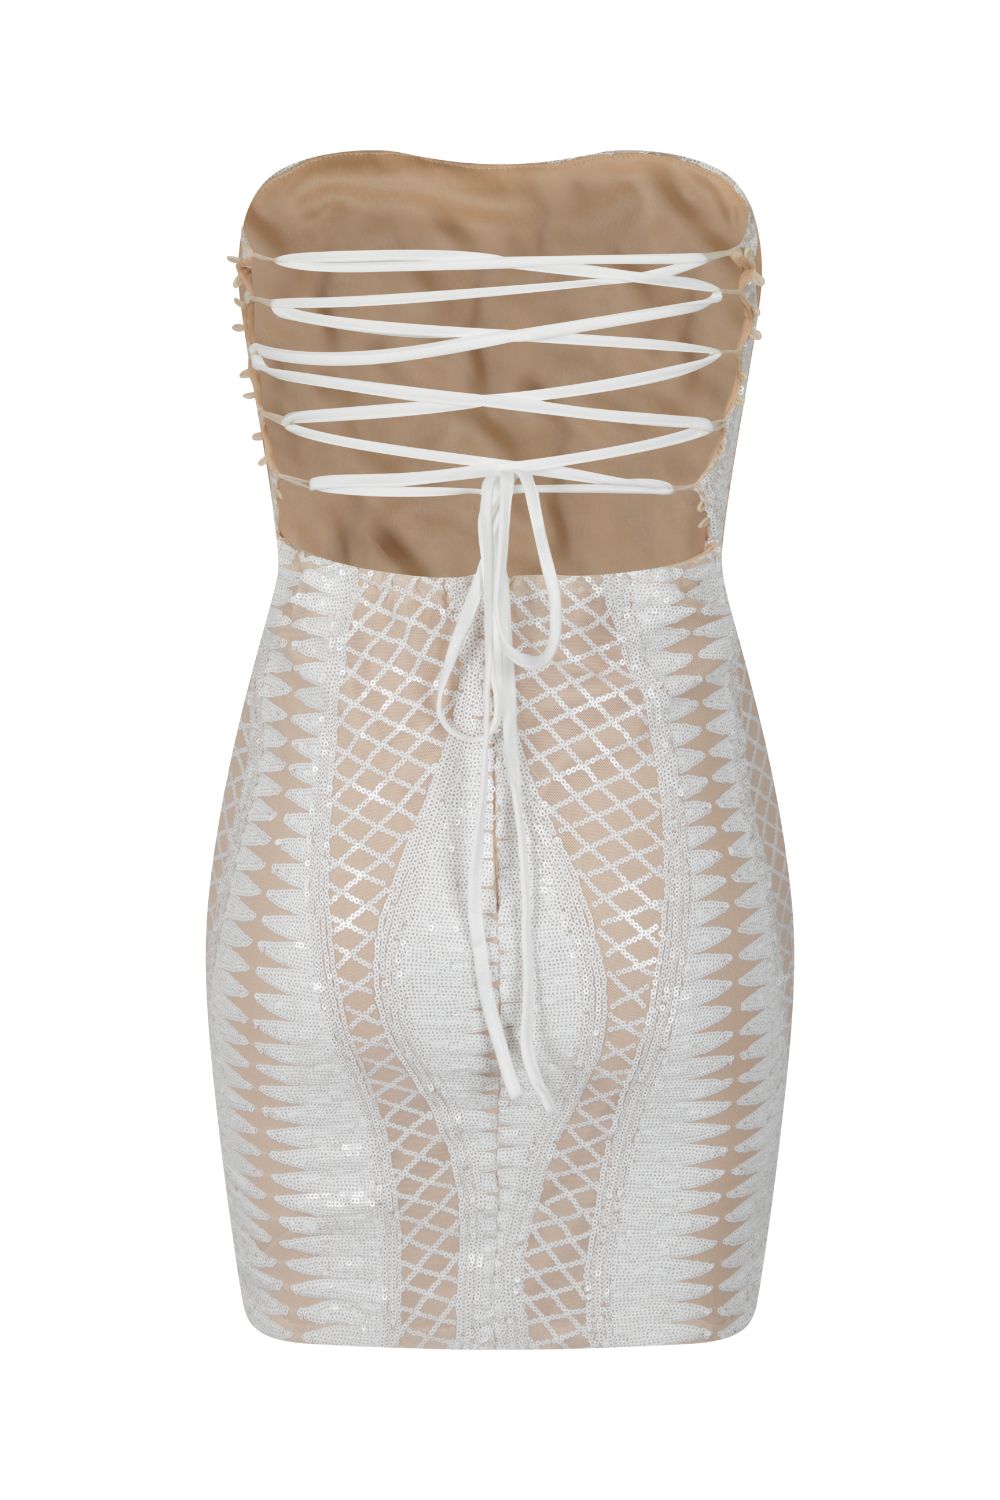 Tie Me Up White Nude Bandeau Cage Sequin Bandage Illusion Lace Up Dress